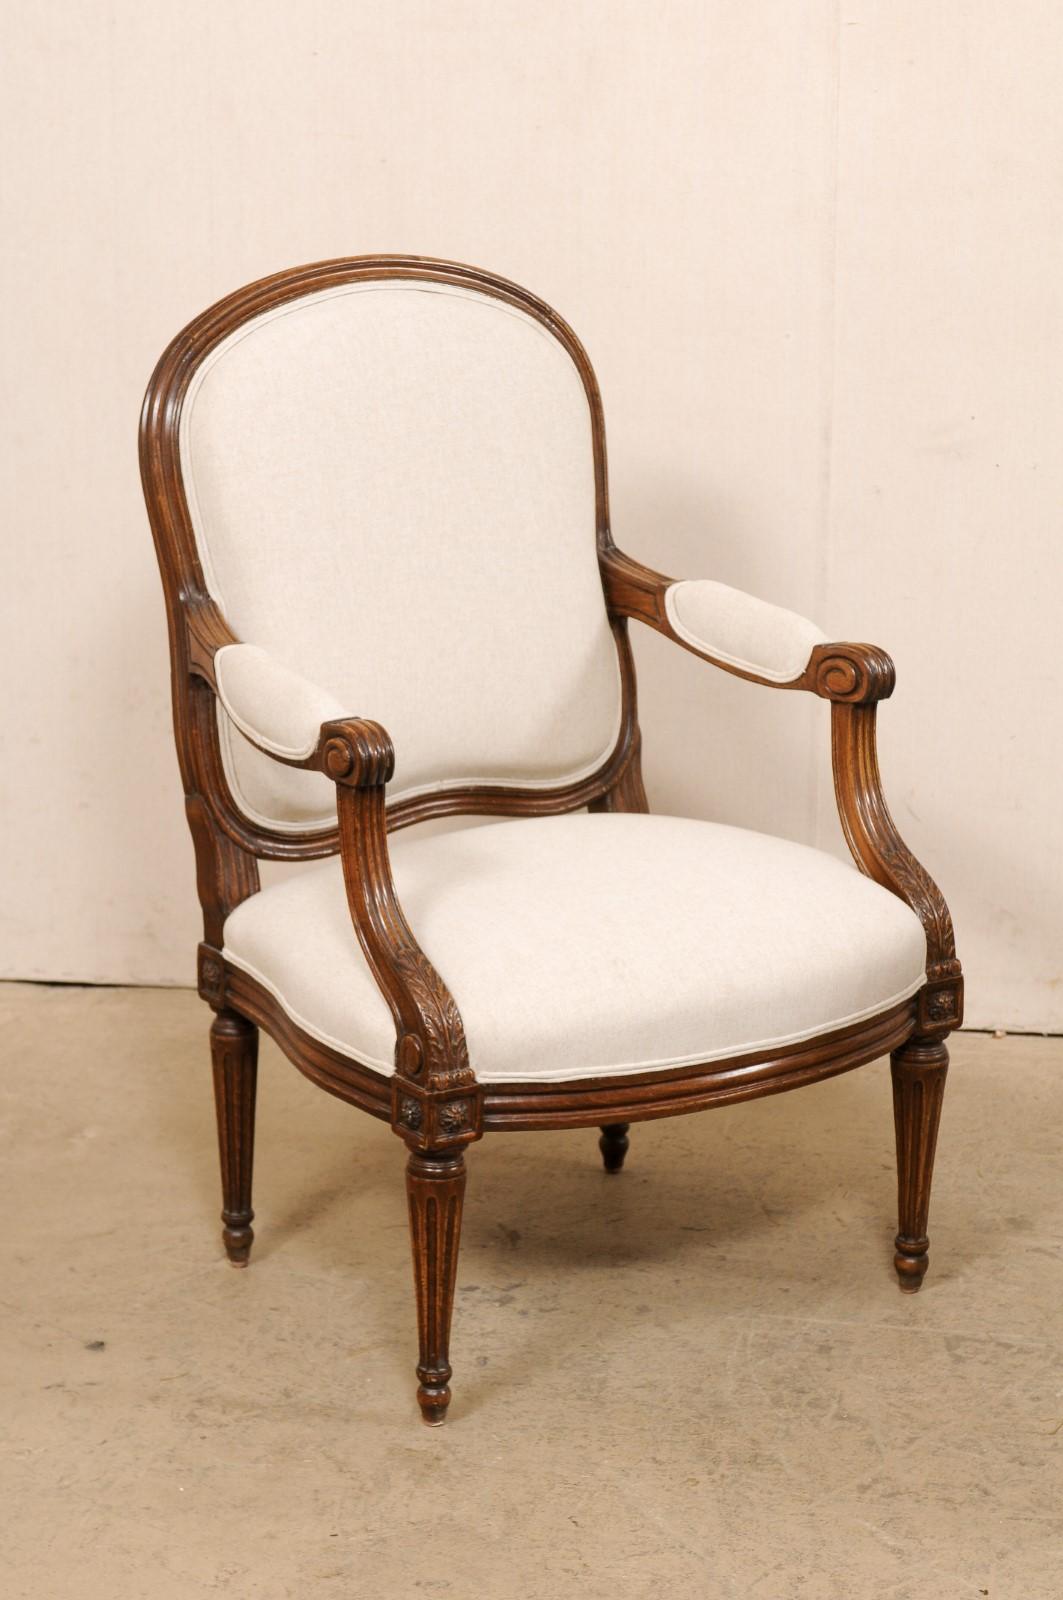 Louis XVI 19th C. French Pair Carved-Wood Fauteuil Armchairs, Newly Upholstered in Linen For Sale